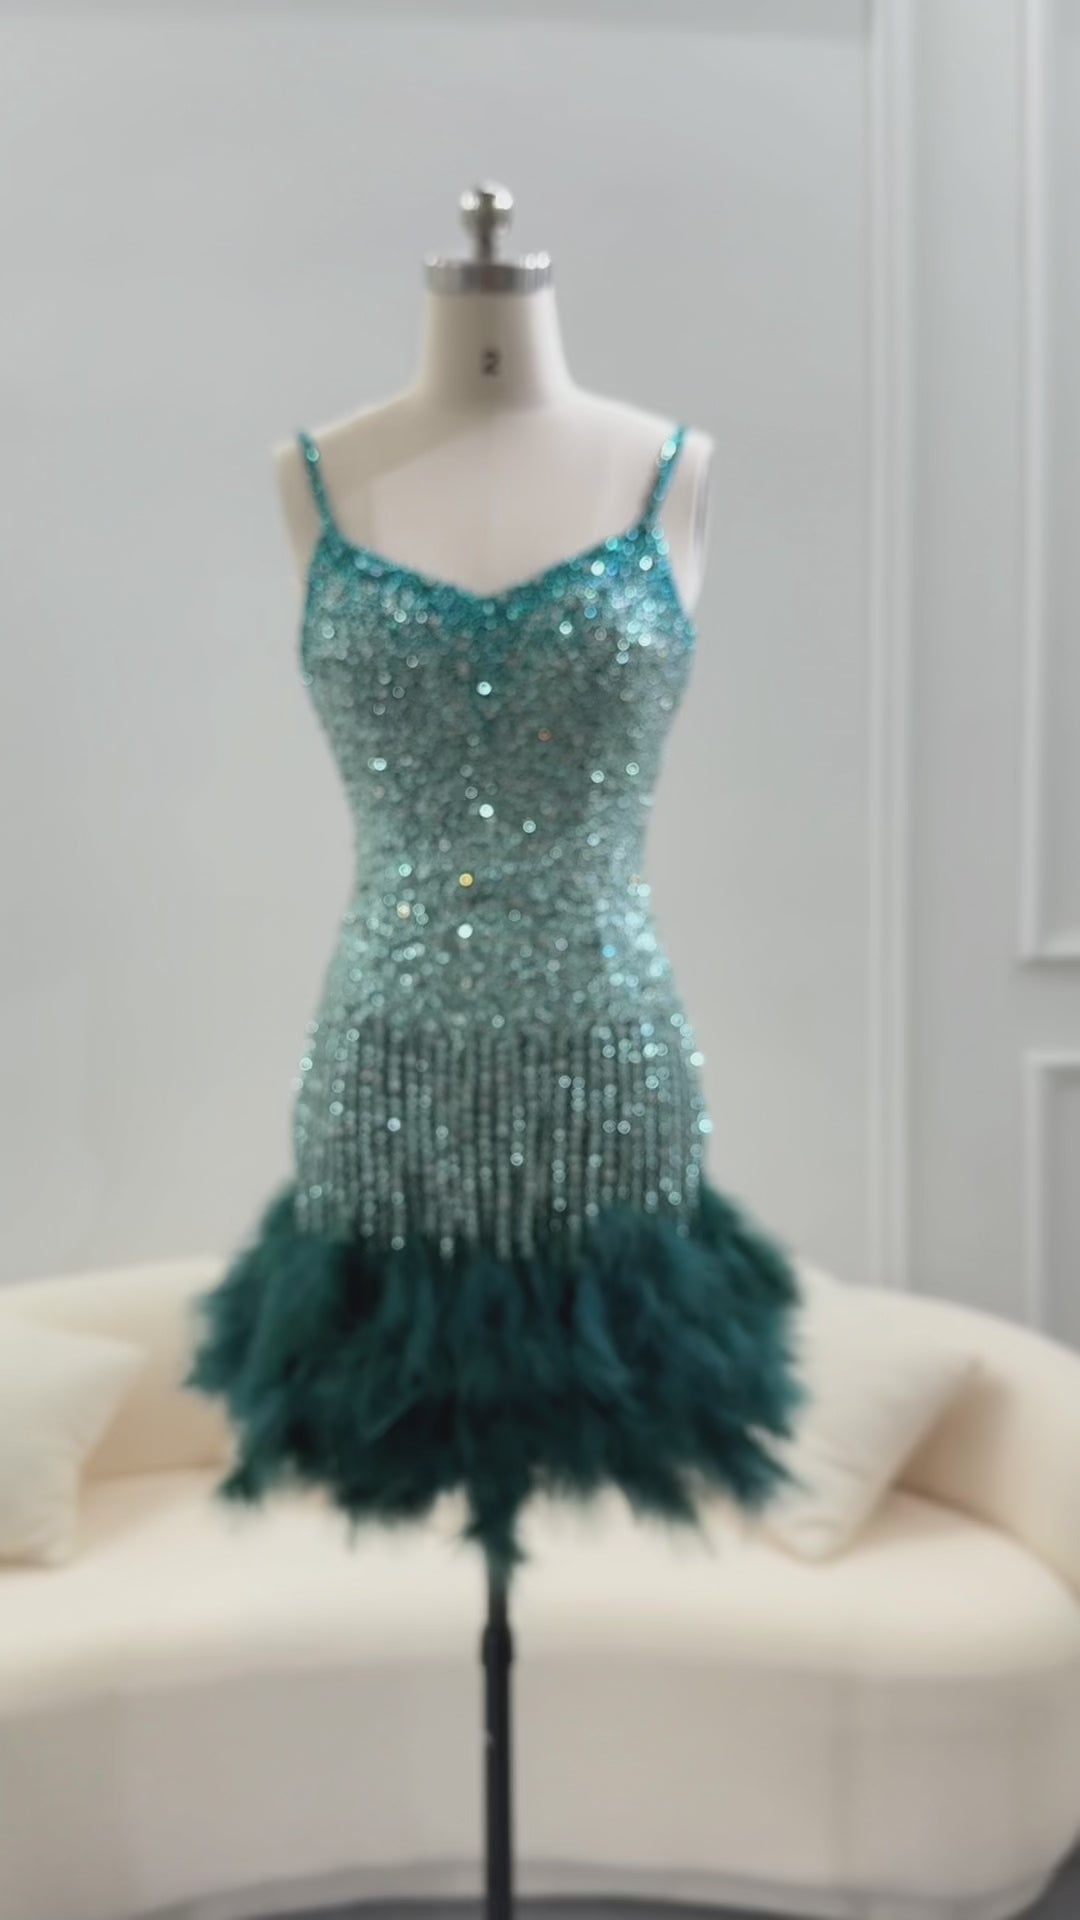 Dreamy Vow Emerald Green Short Mini Cocktail Party Dresses for Women Wedding 2023 Luxury Feathers Pink Evening Club Gowns SS173